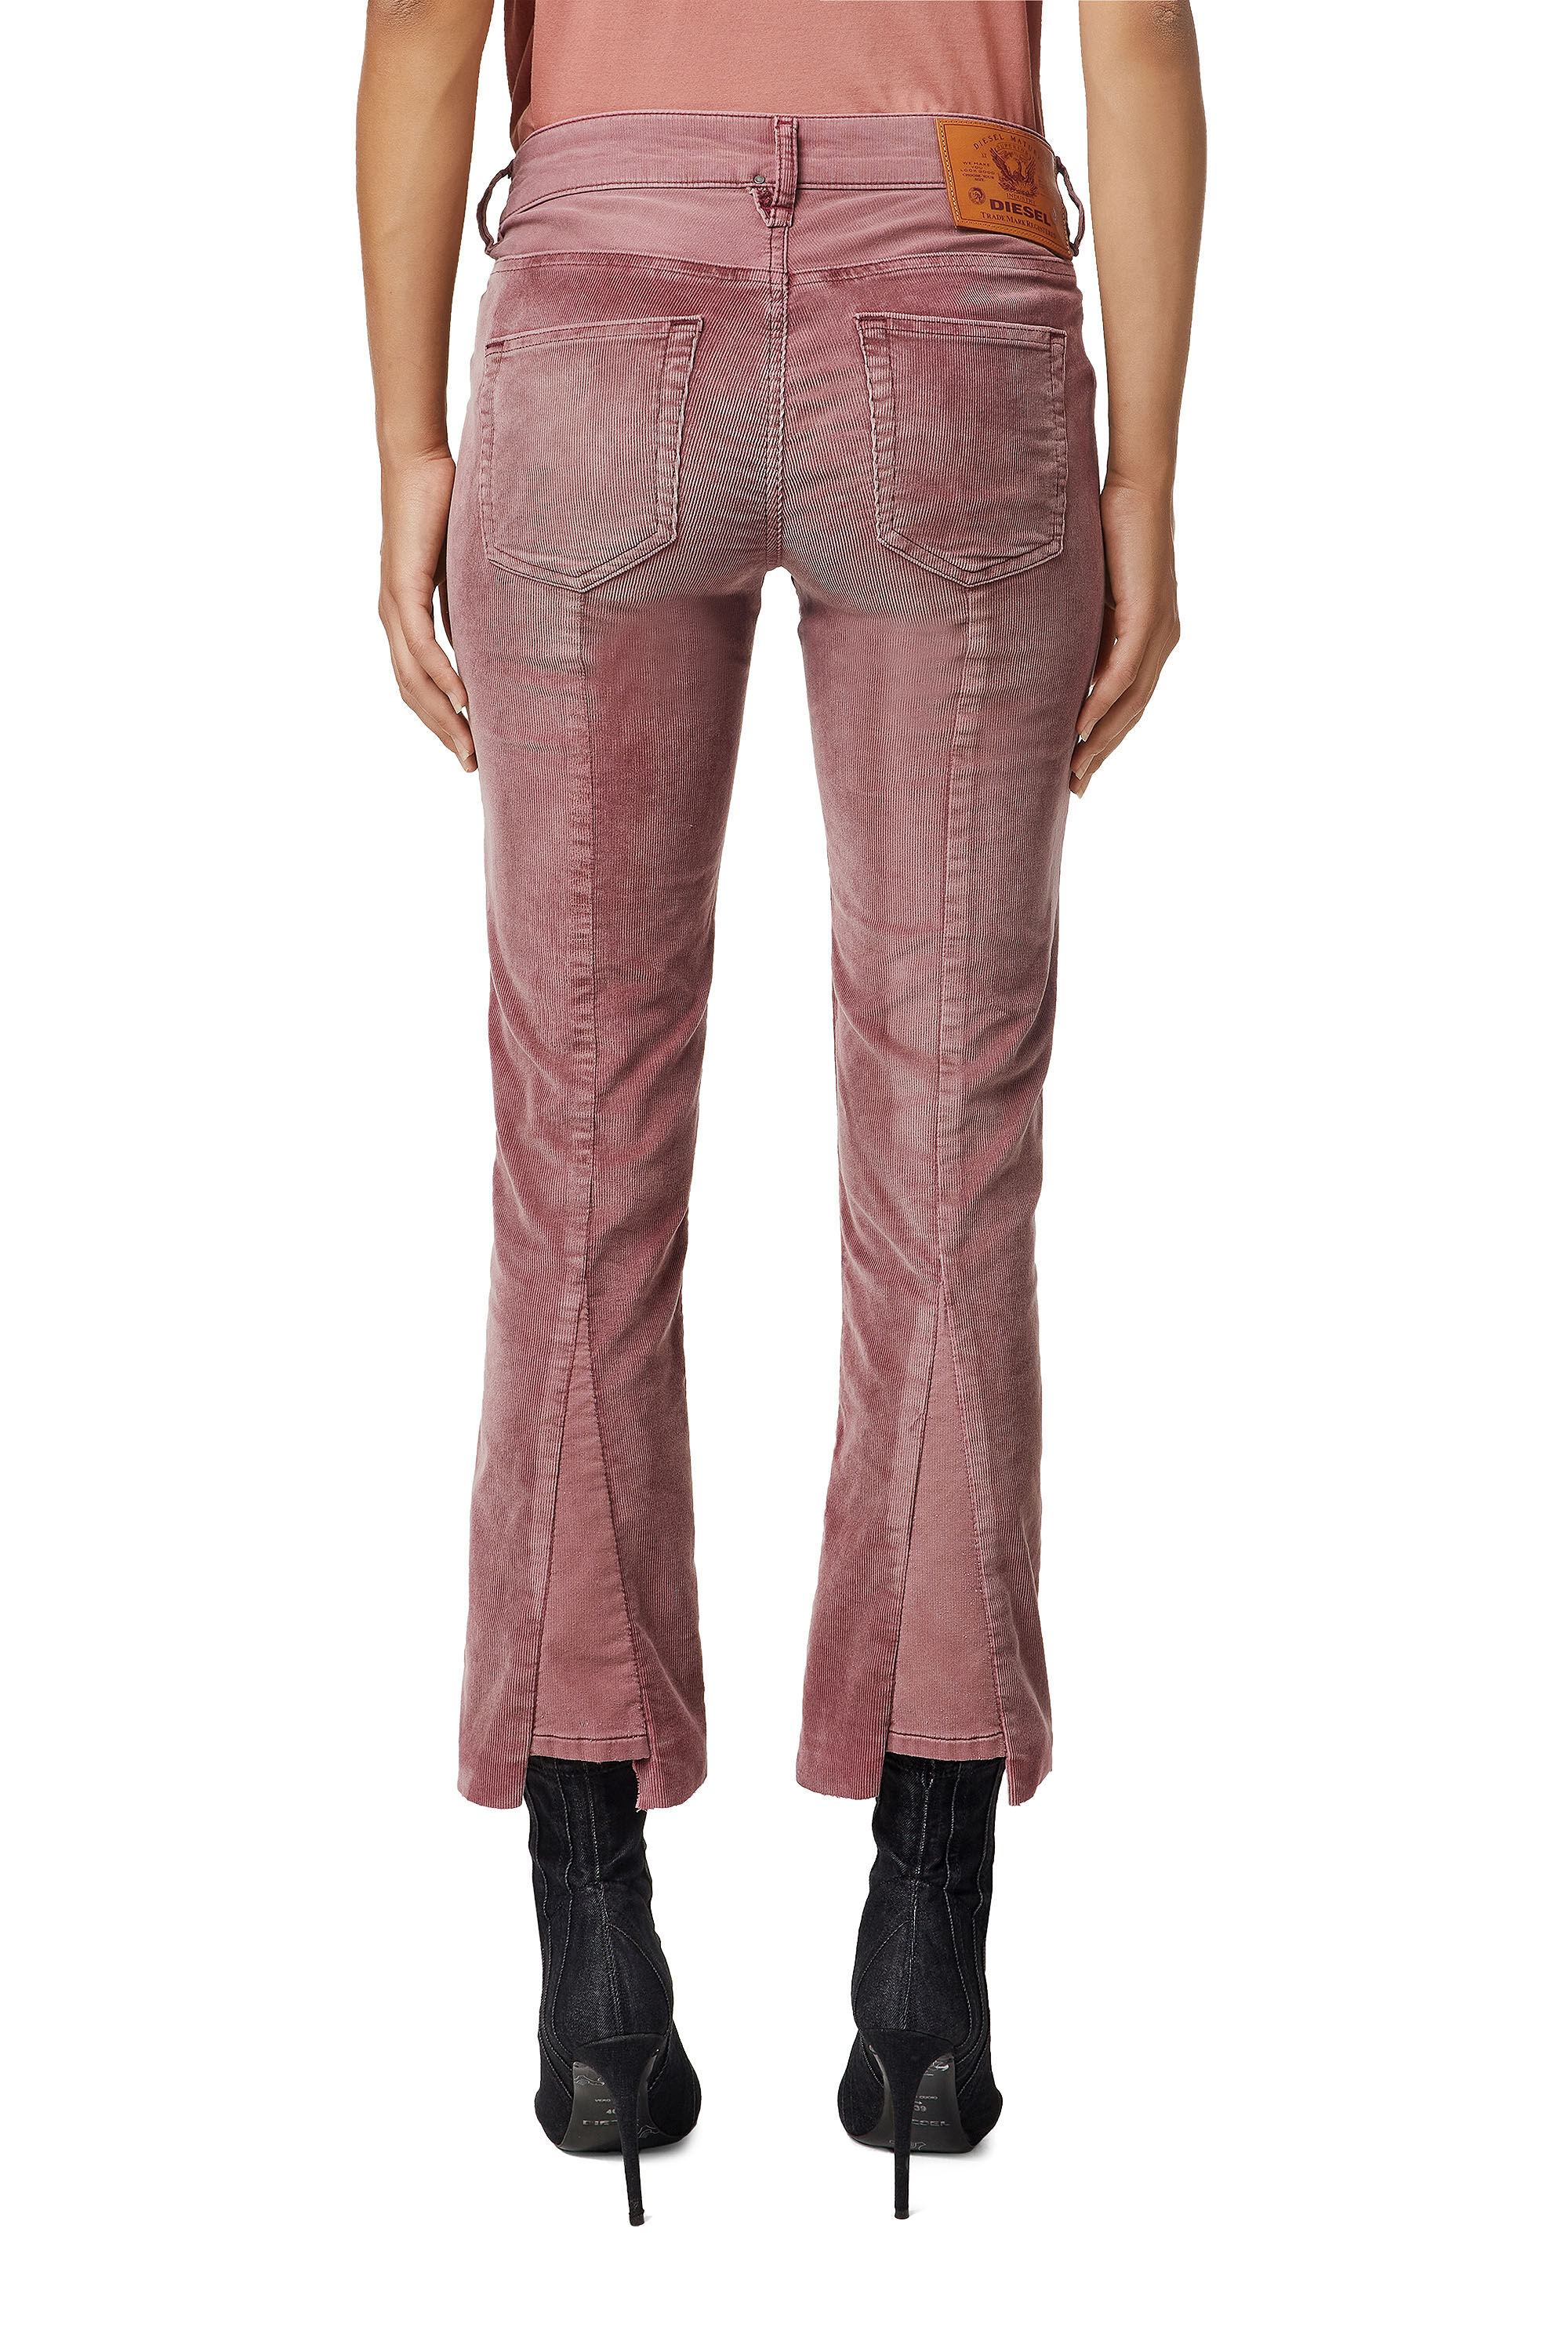 D-EBBEY-KYV: Bootcut and Flare Colored Jeans | Diesel